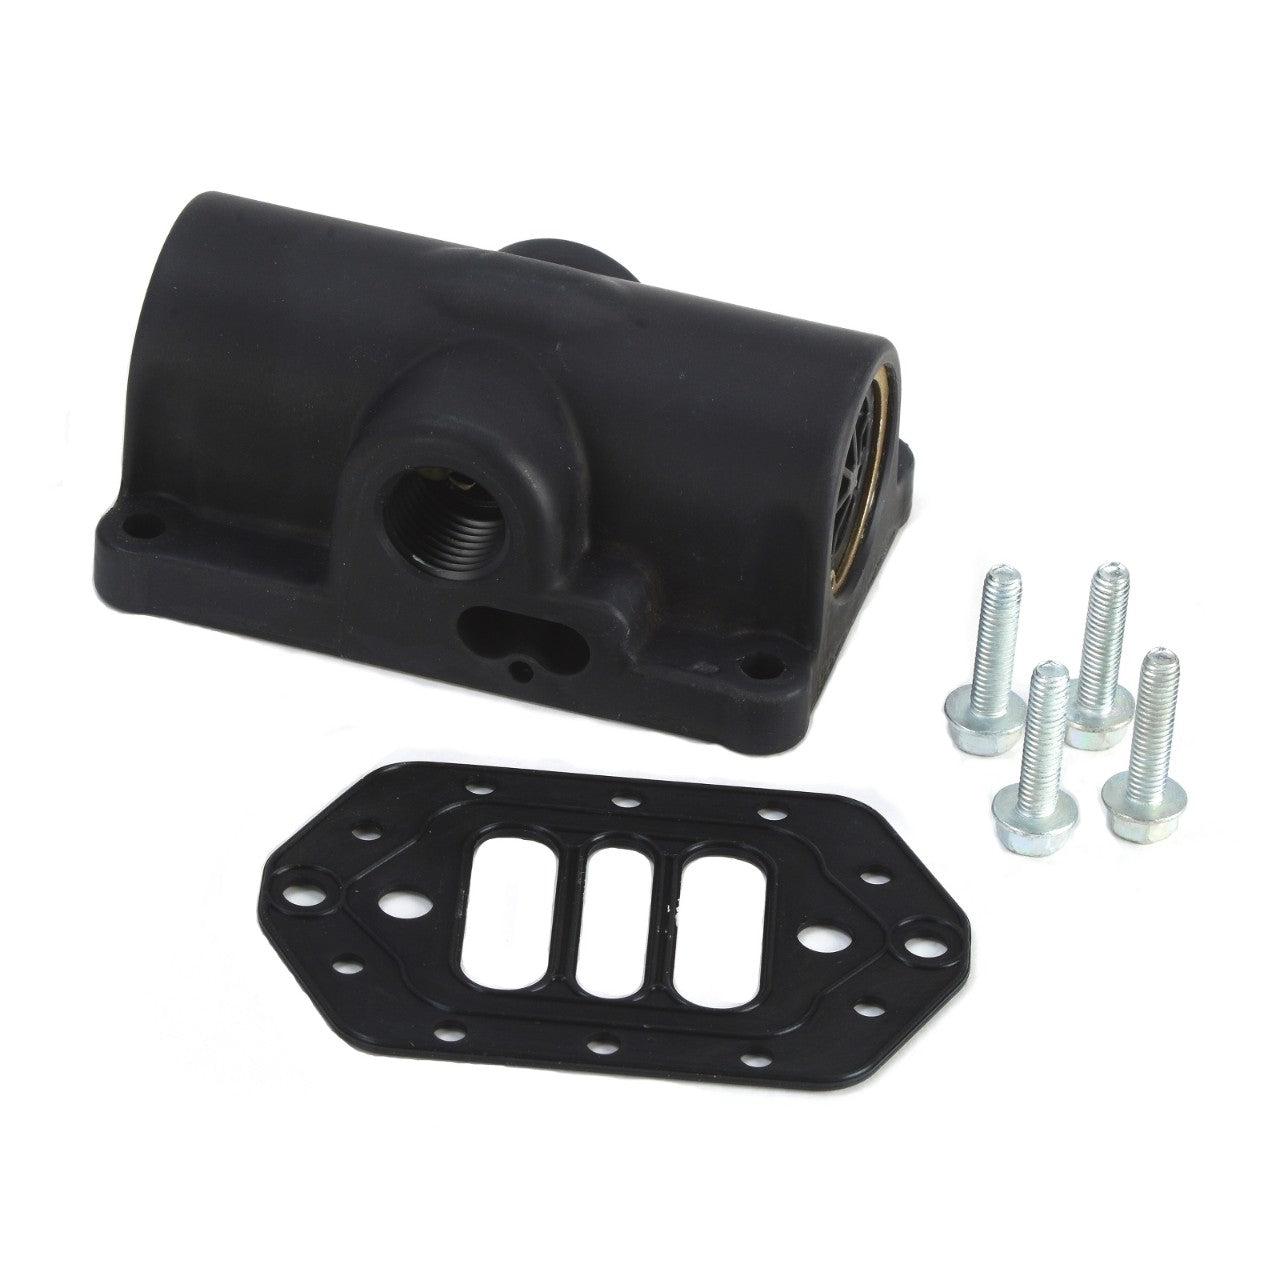 Complete Air Valve Replacement Kit, Standard, for models with no DataTrak or DataTrak with cycle count only